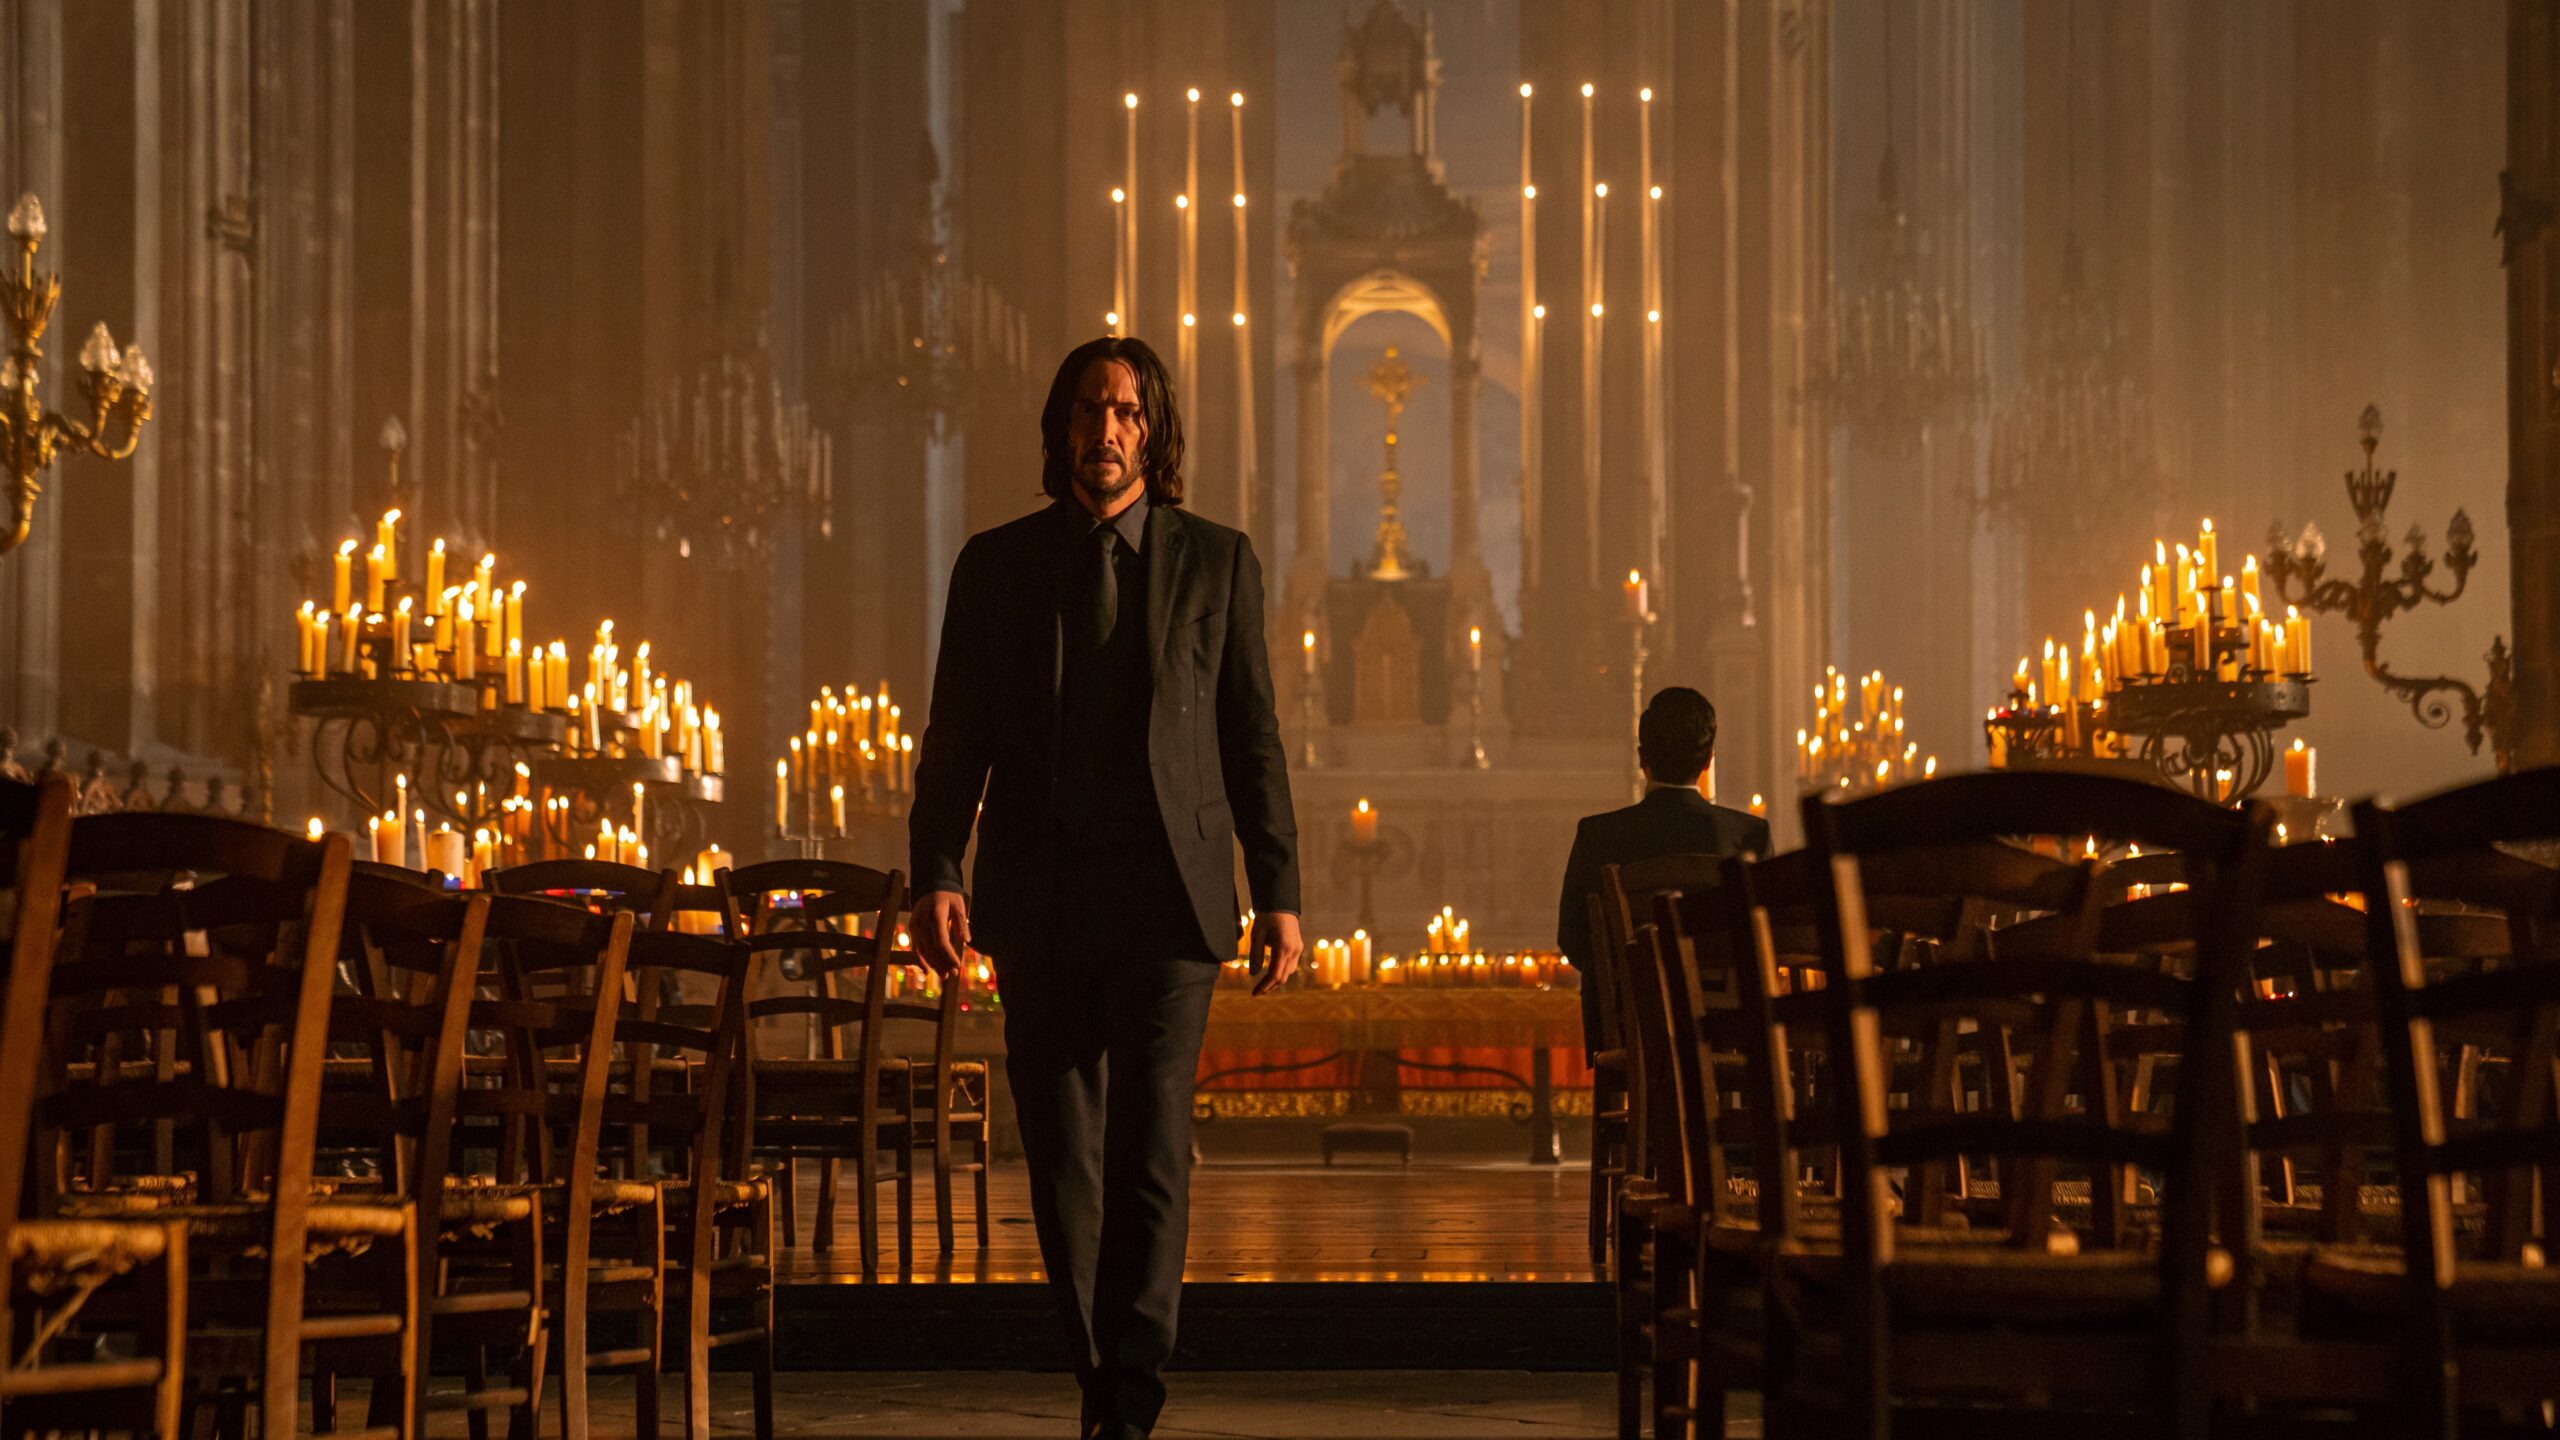 Lionsgate Motion Picture Group Chair, Joe Drake confirmed that 'John Wick:  Chapter 5' is being written following the end of the writers'…